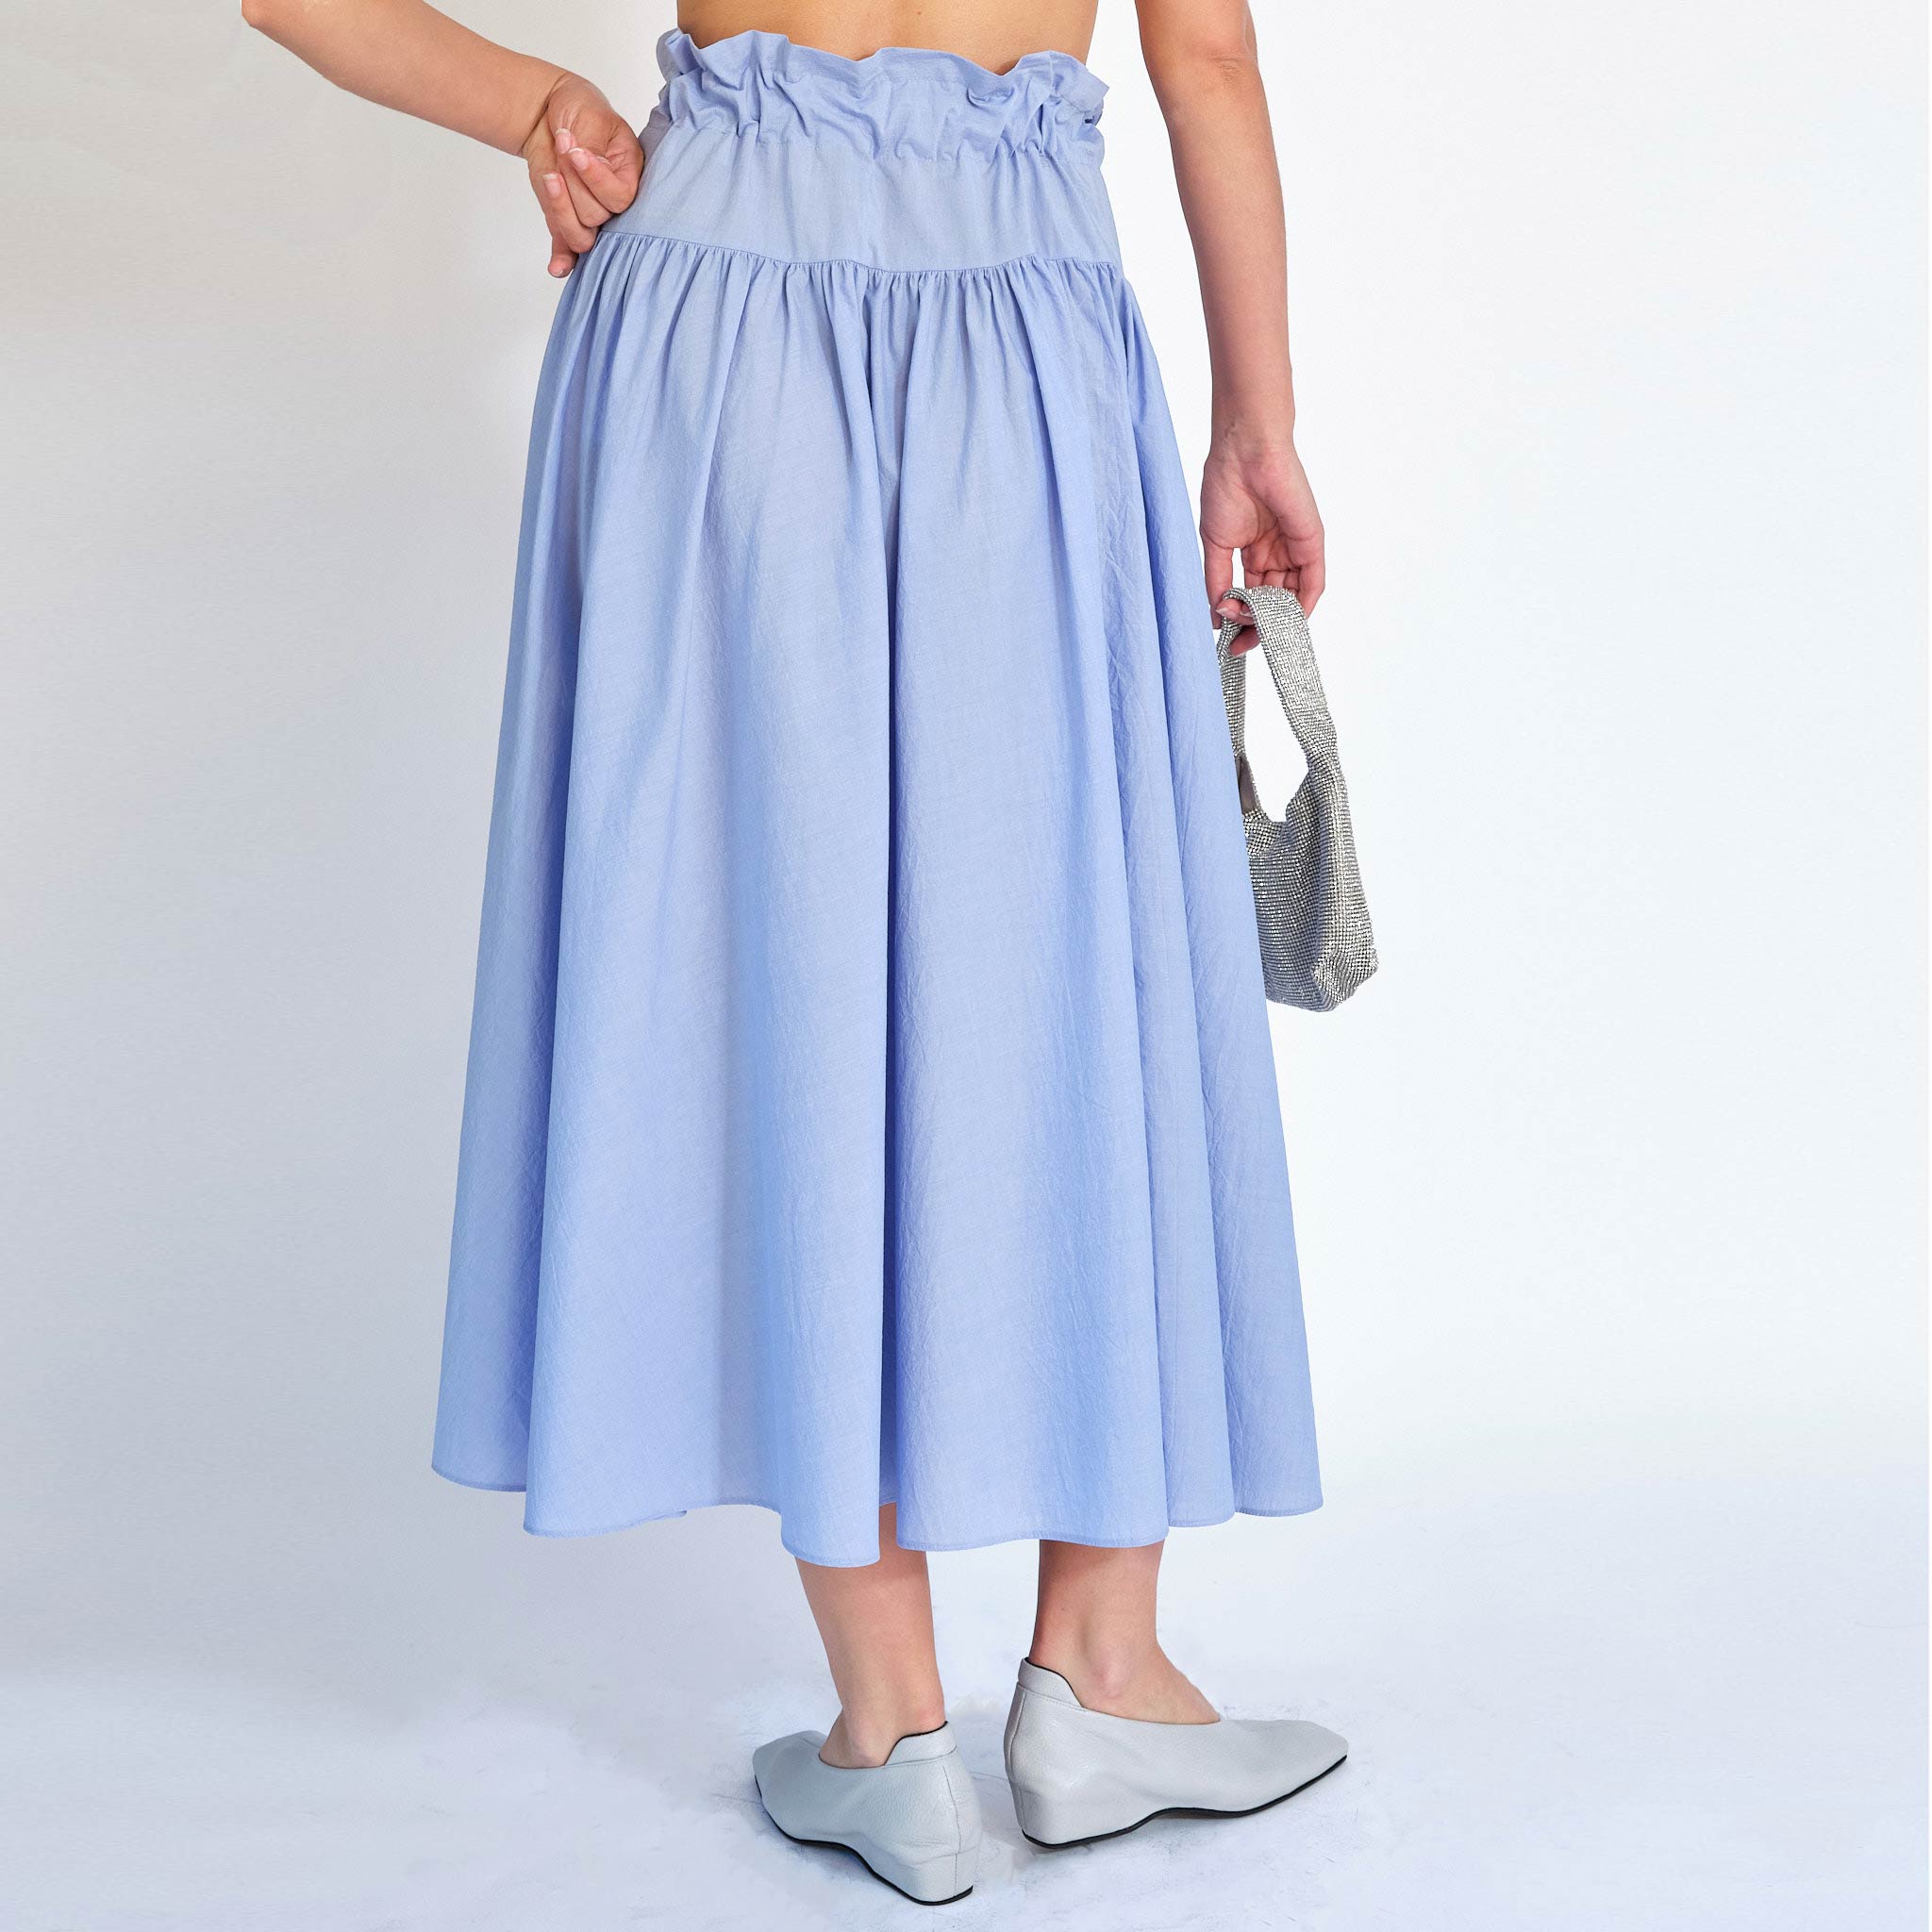 A model wears the Carlita Skirt, with a ruched, paperbag style waist and built in tie, with a side slit opening - back view.